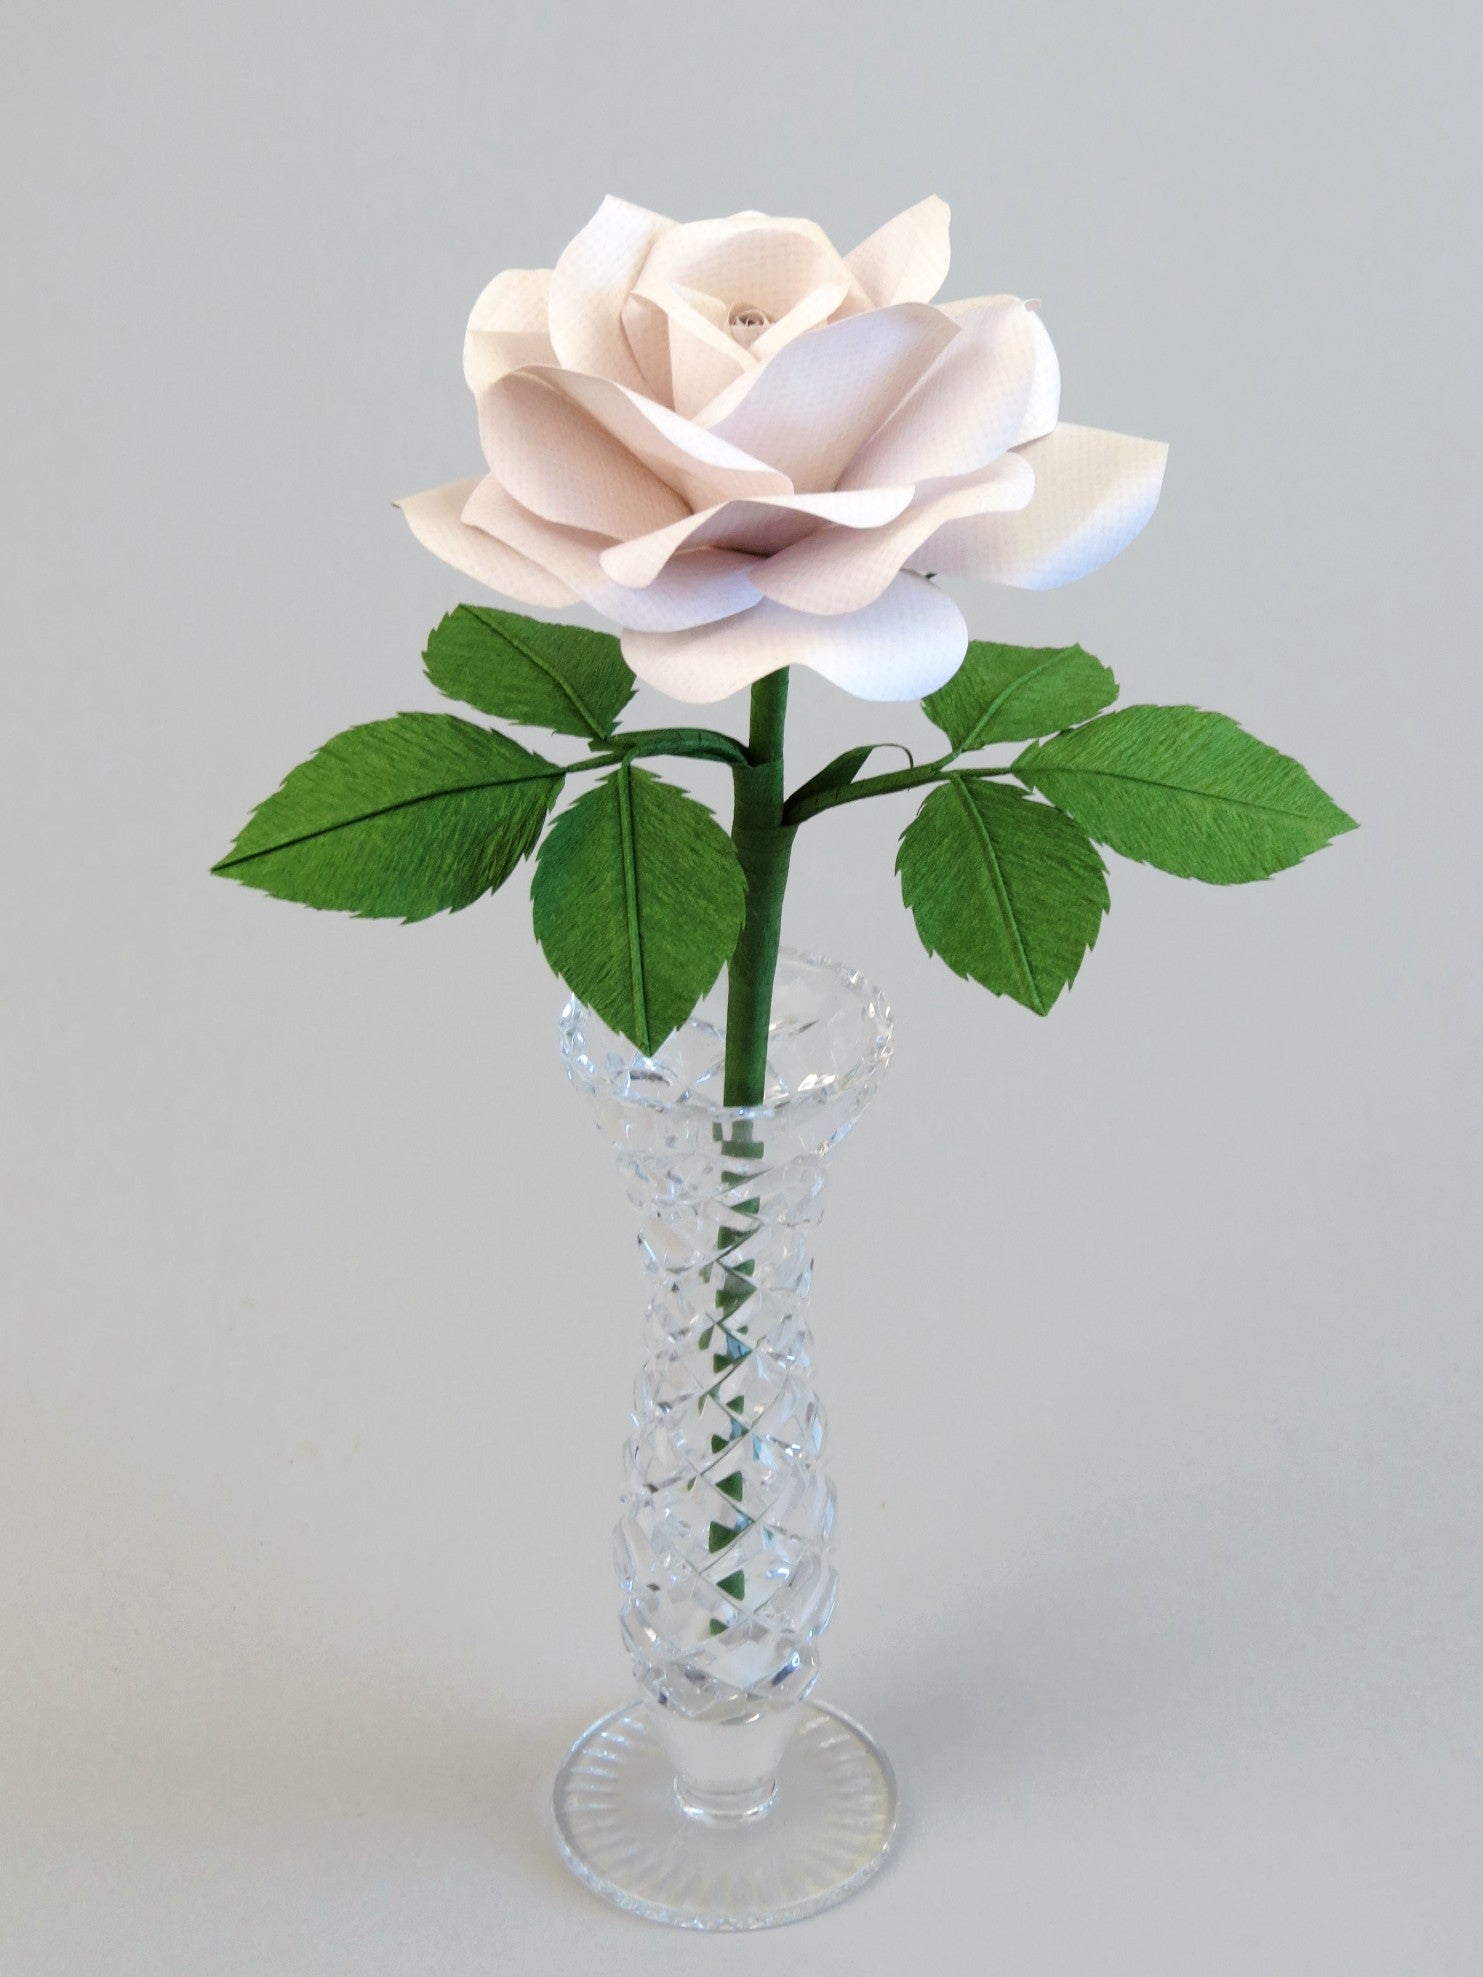 White linen grain paper rose with six leaves standing in a narrow glass vase against a light grey background